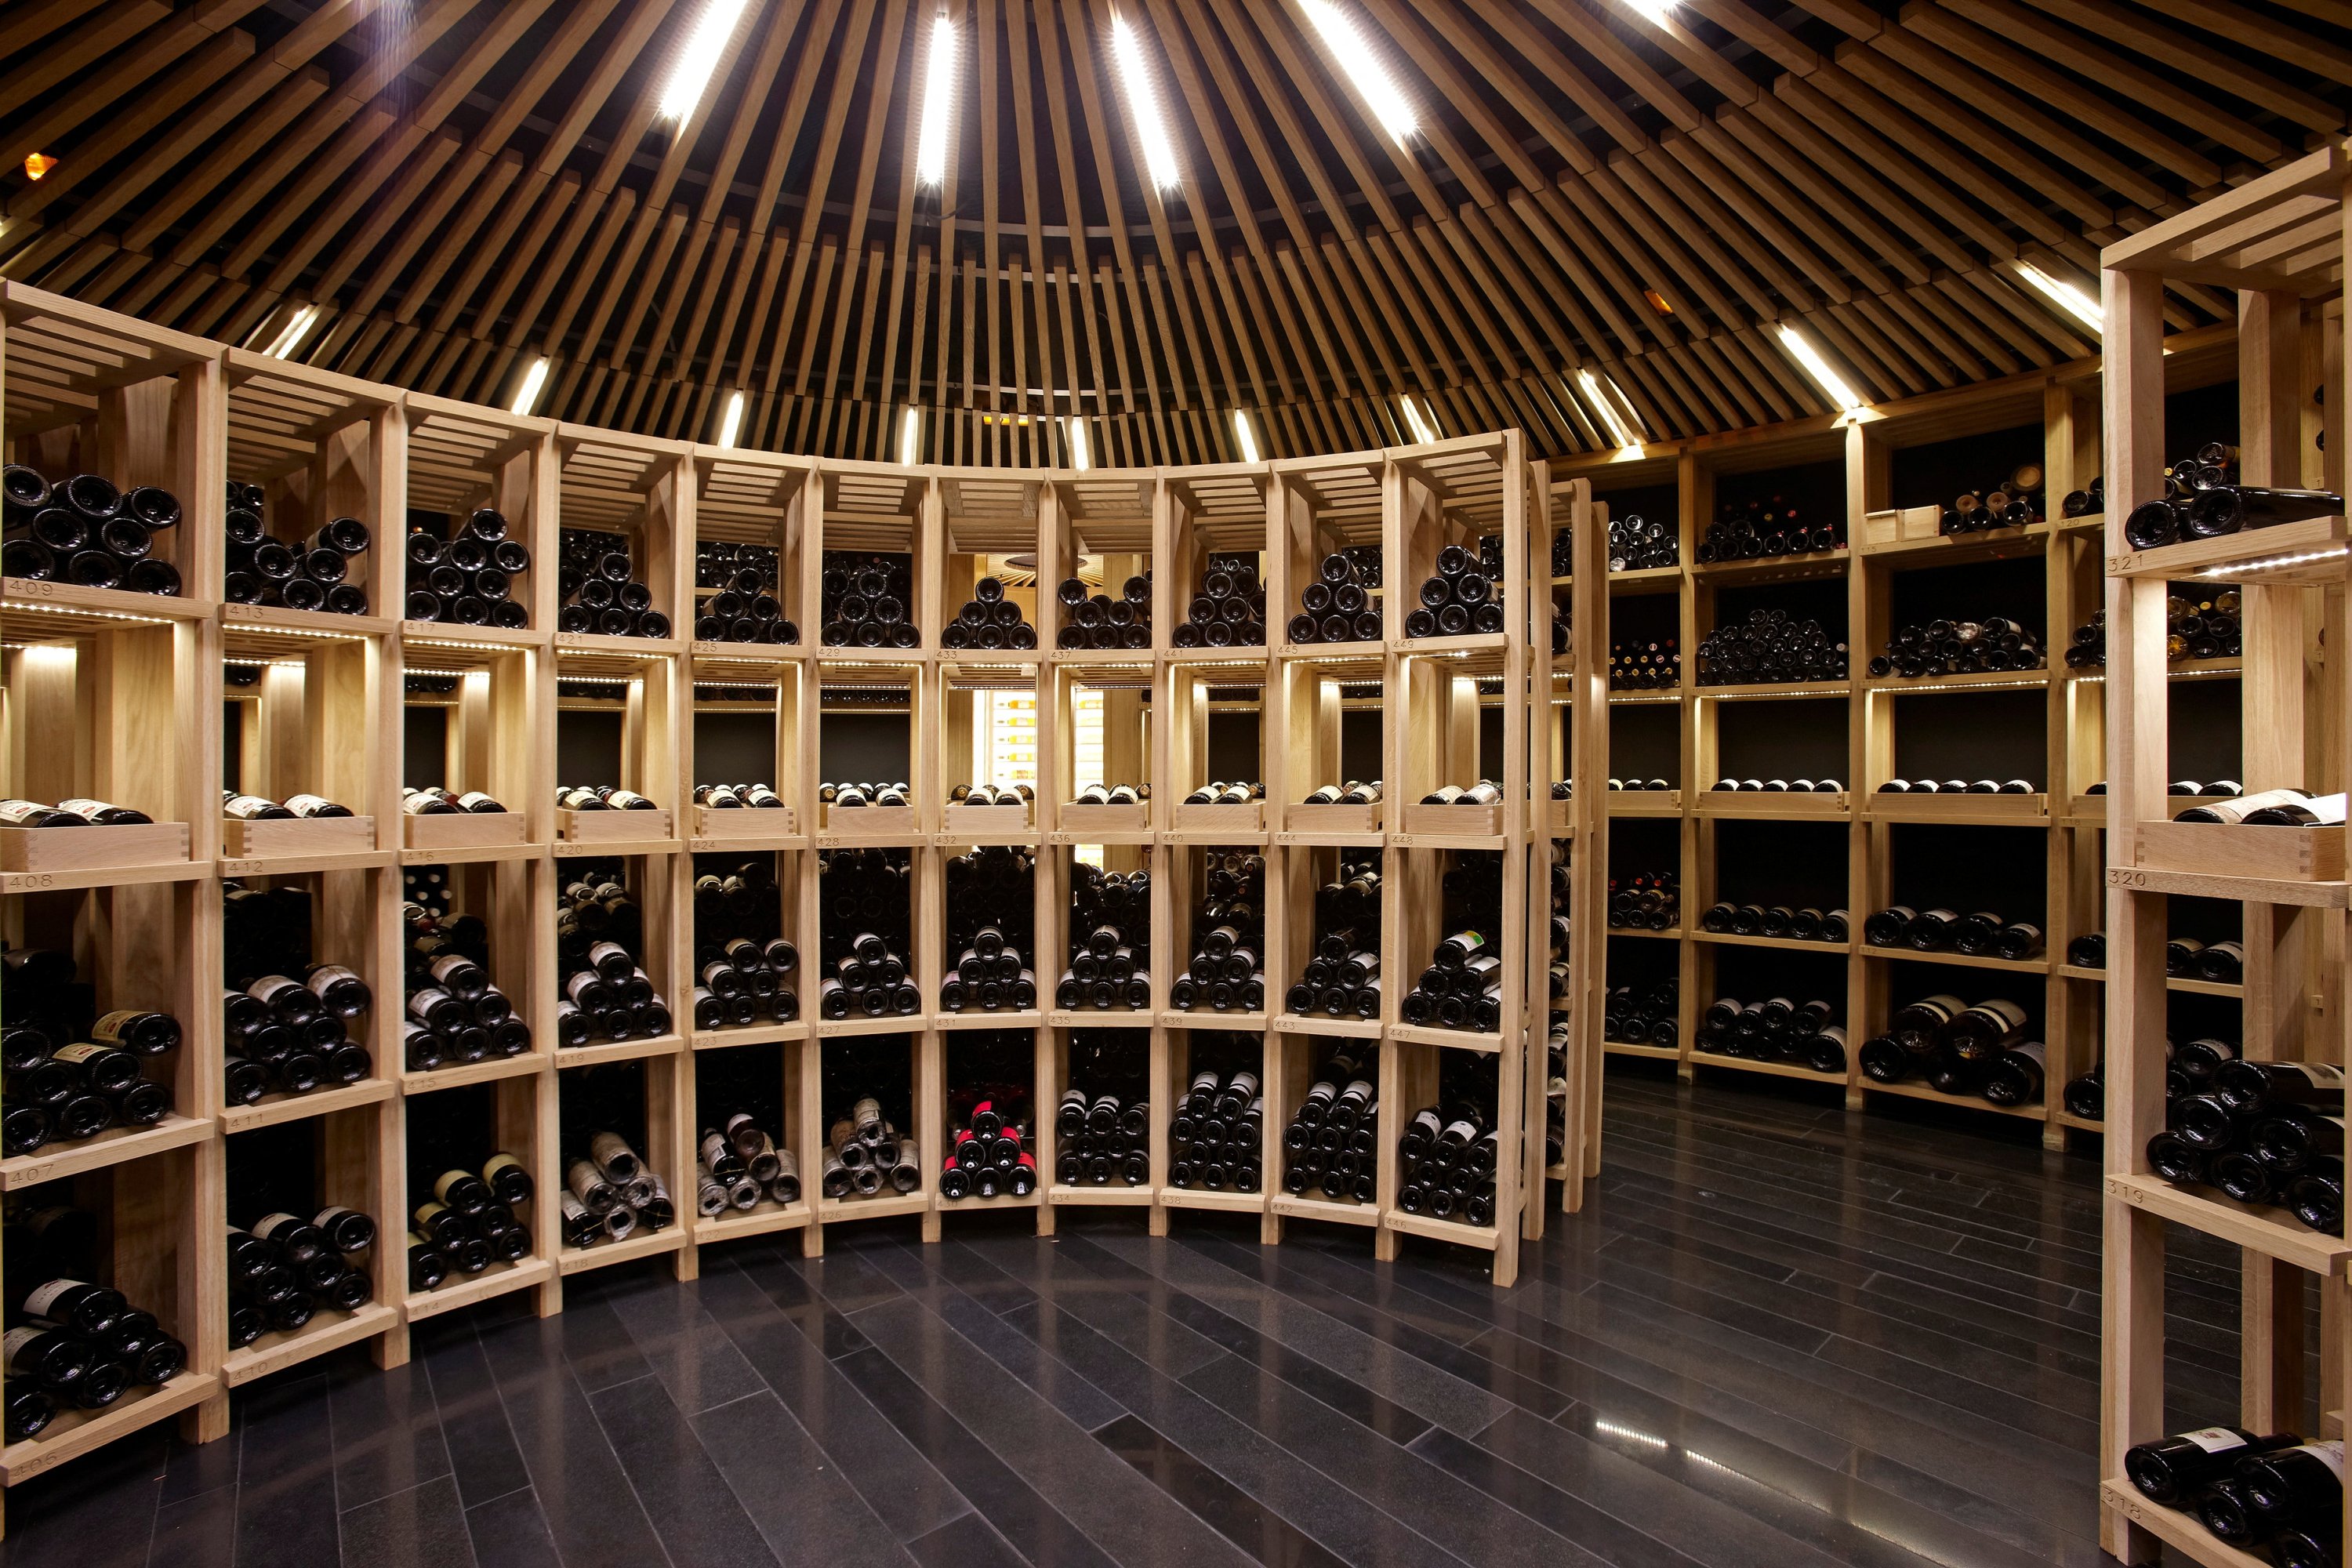 General view of the bottles of wine at Restaurante Atrio's wine cellar in Caceres, Spain, Jan. 16, 2011. (Reuters Photo)